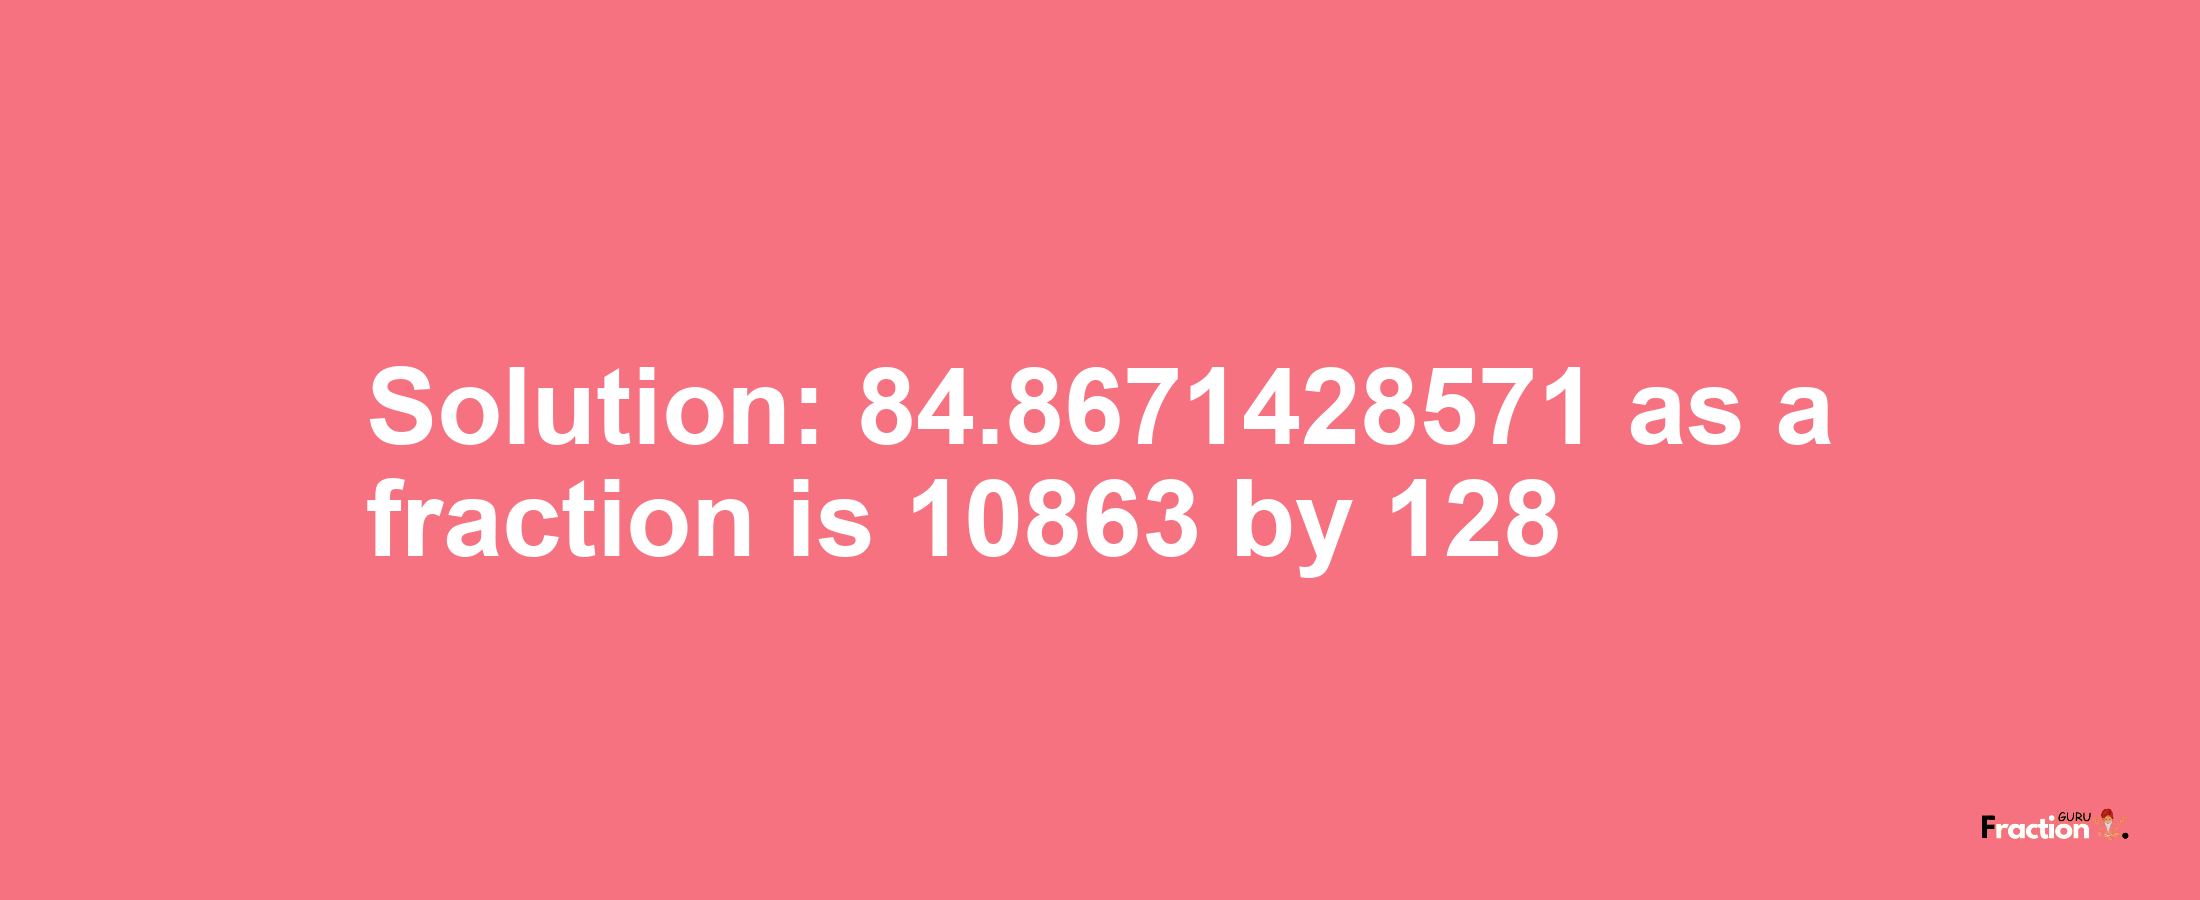 Solution:84.8671428571 as a fraction is 10863/128